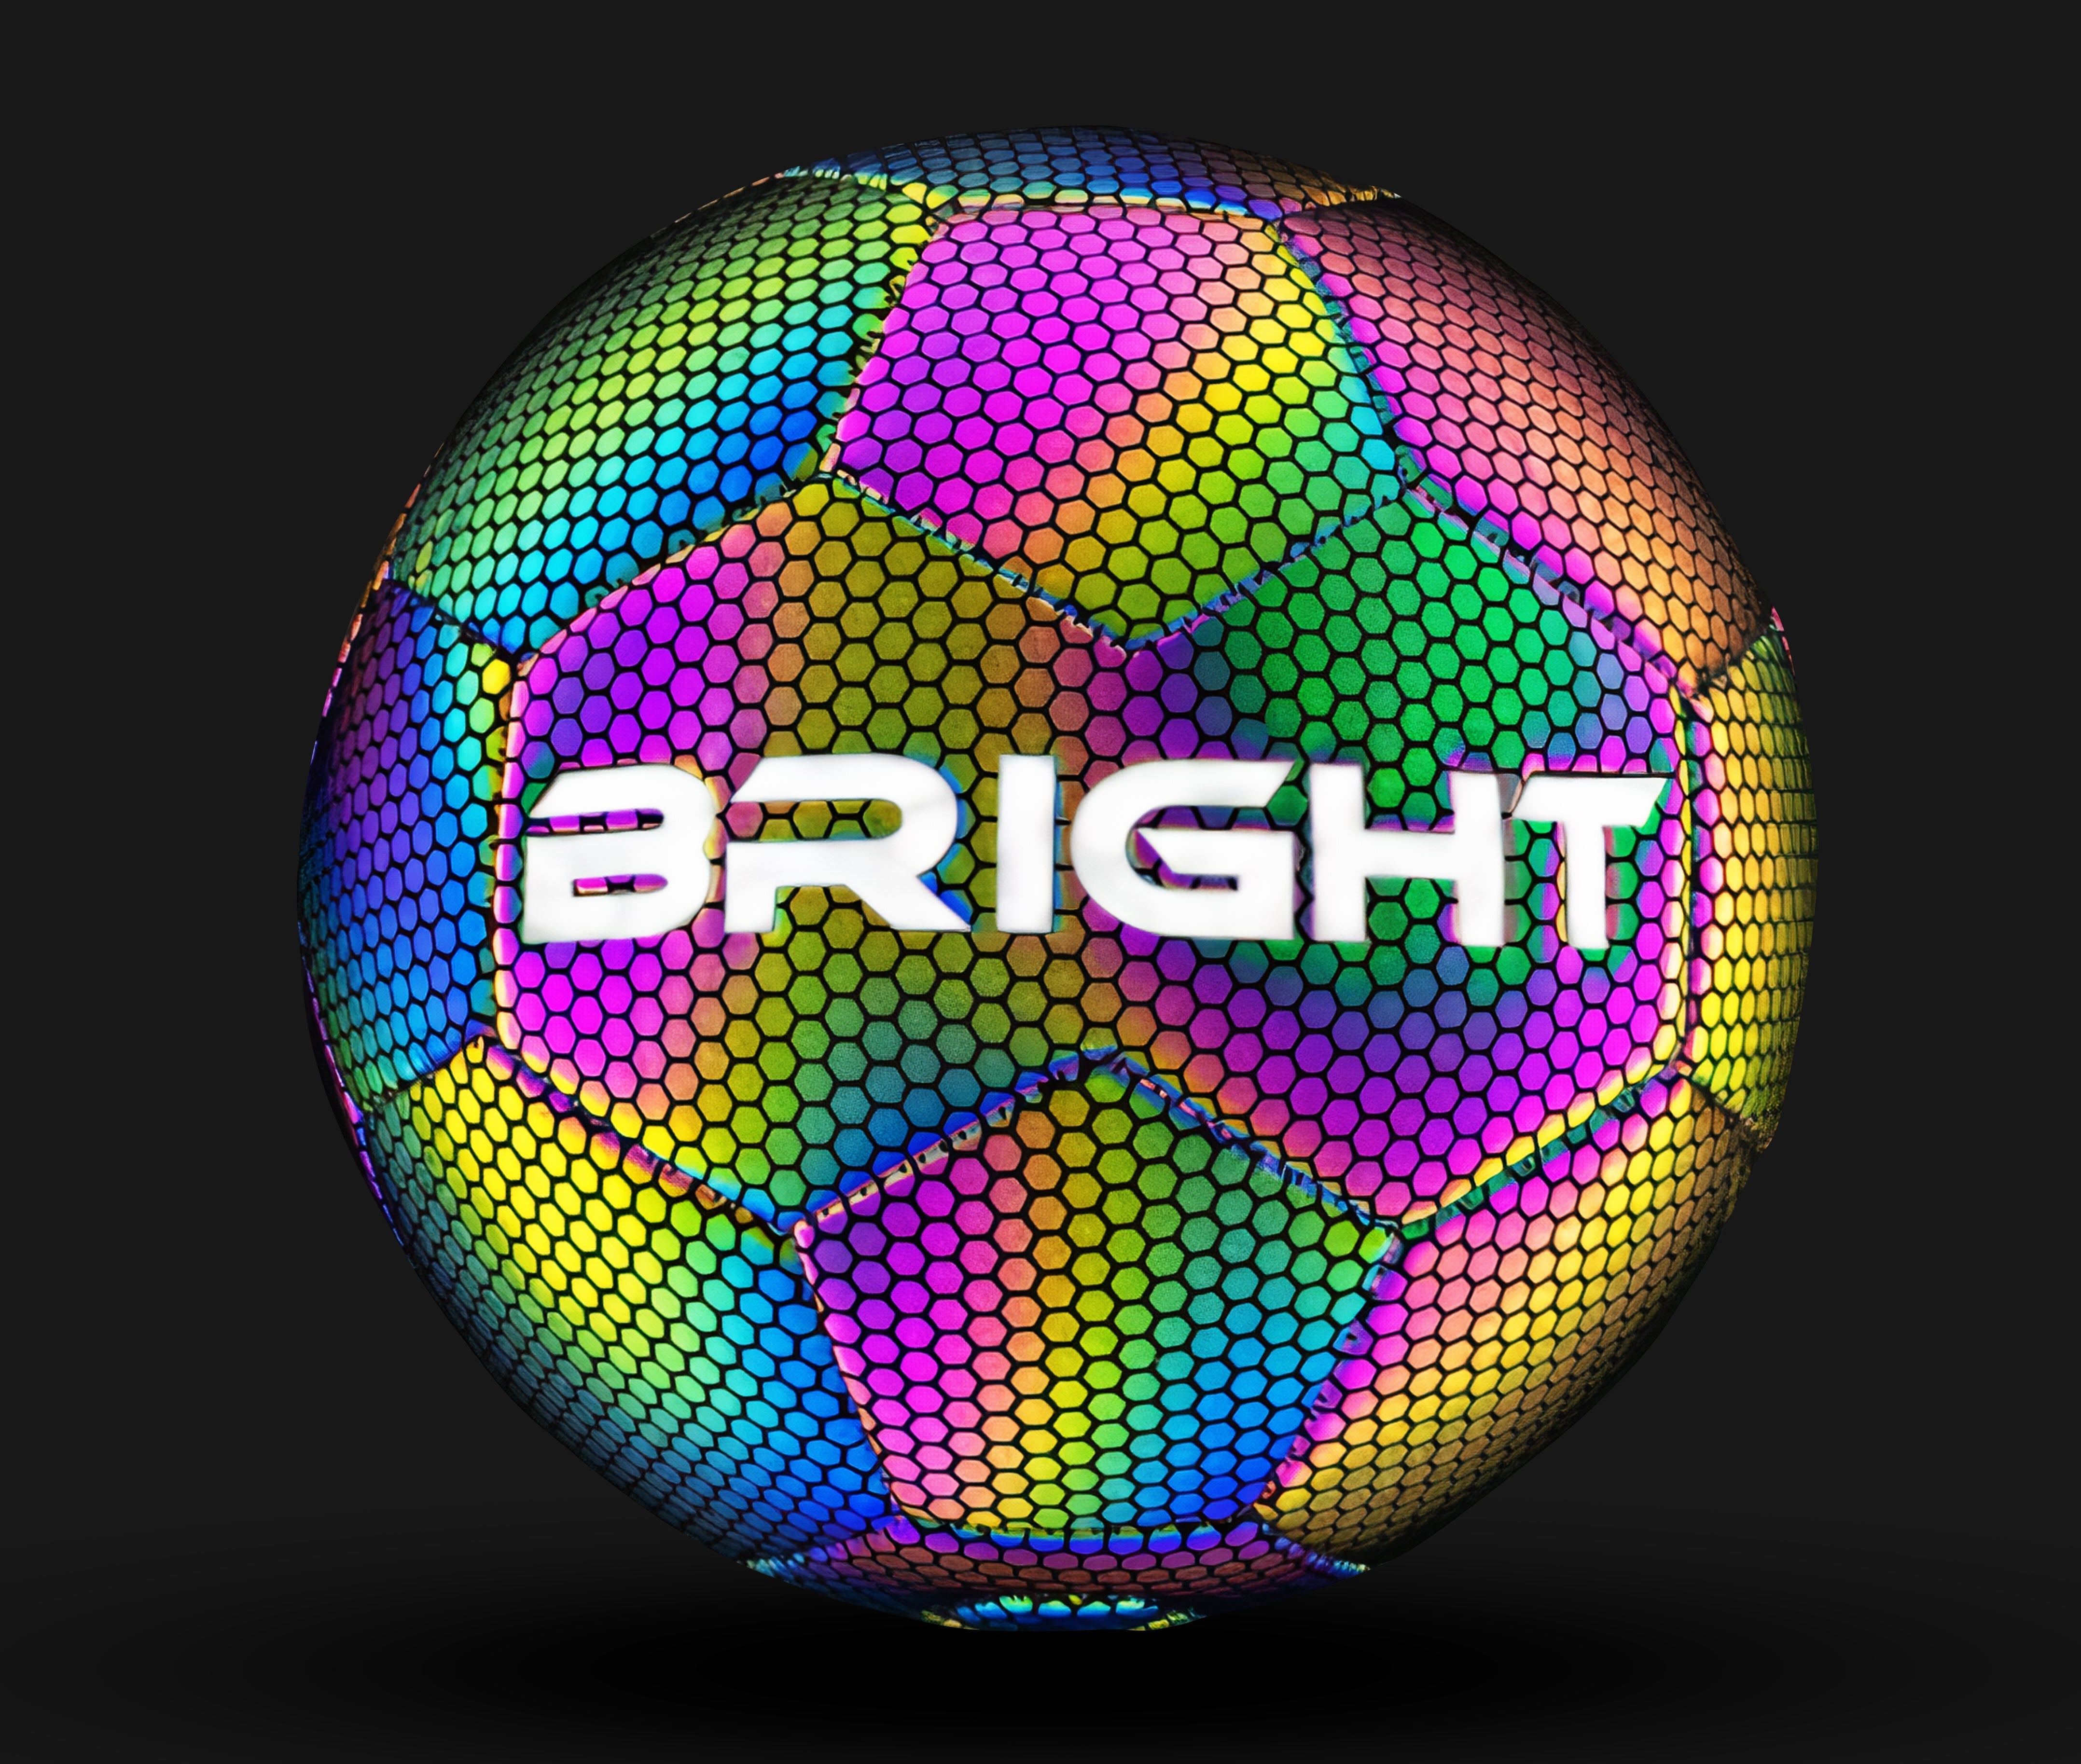 The BRIGHT™ Soccer ball